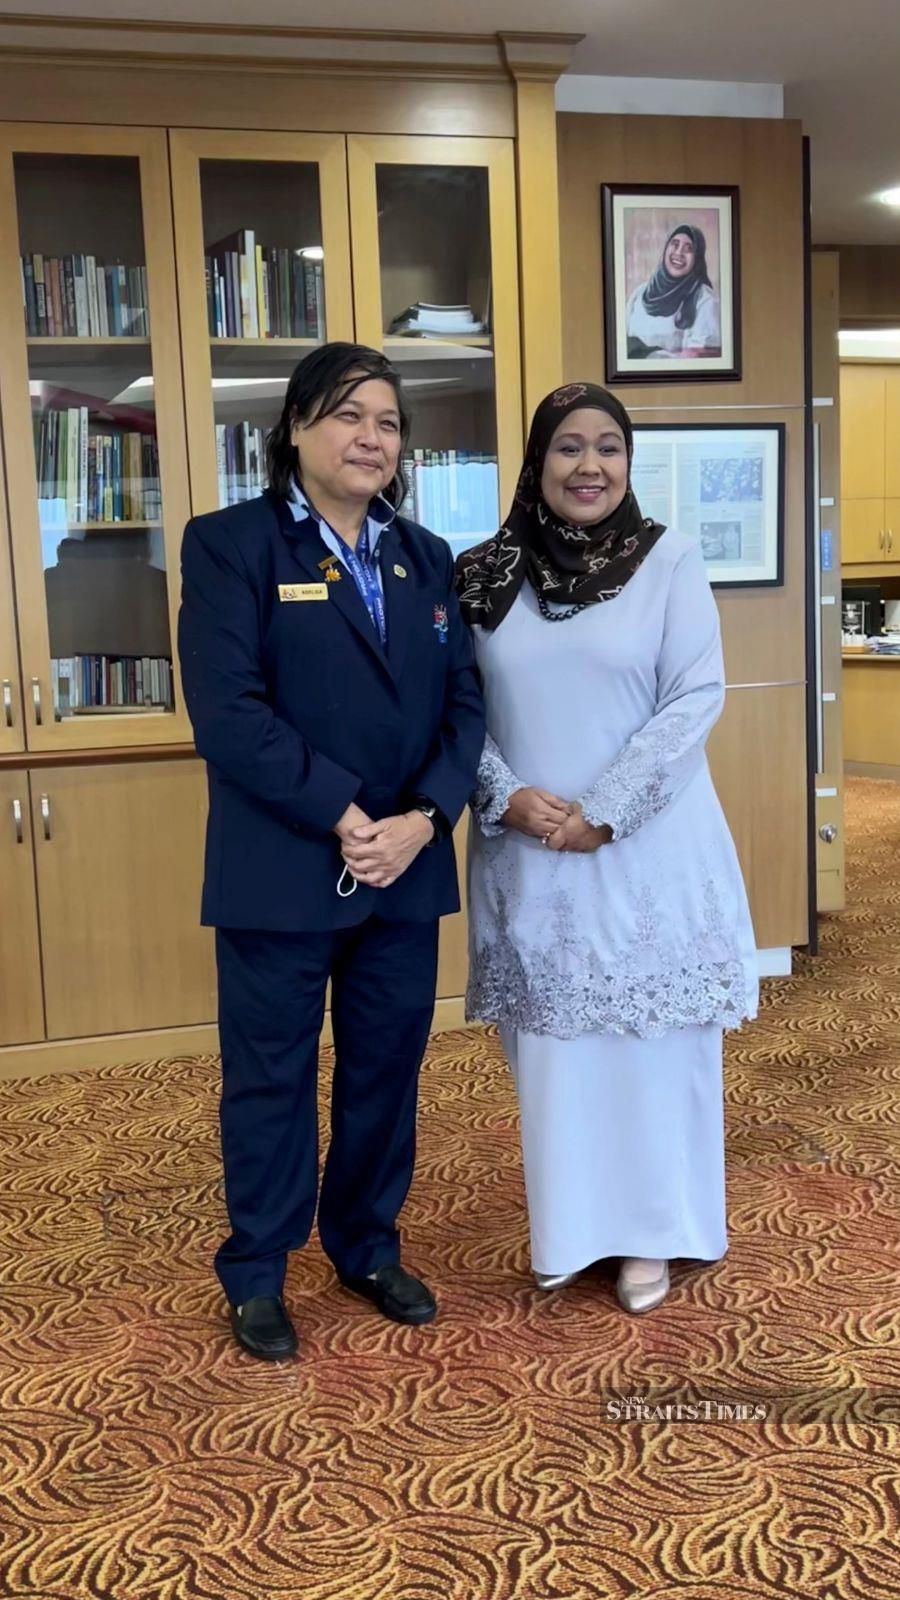  The first woman president of IEM after 63 years with Professor Datuk Ts. Dr Hajah Roziah Mohd Janor, the first woman Vice Chancellor of UiTM after 67 years.